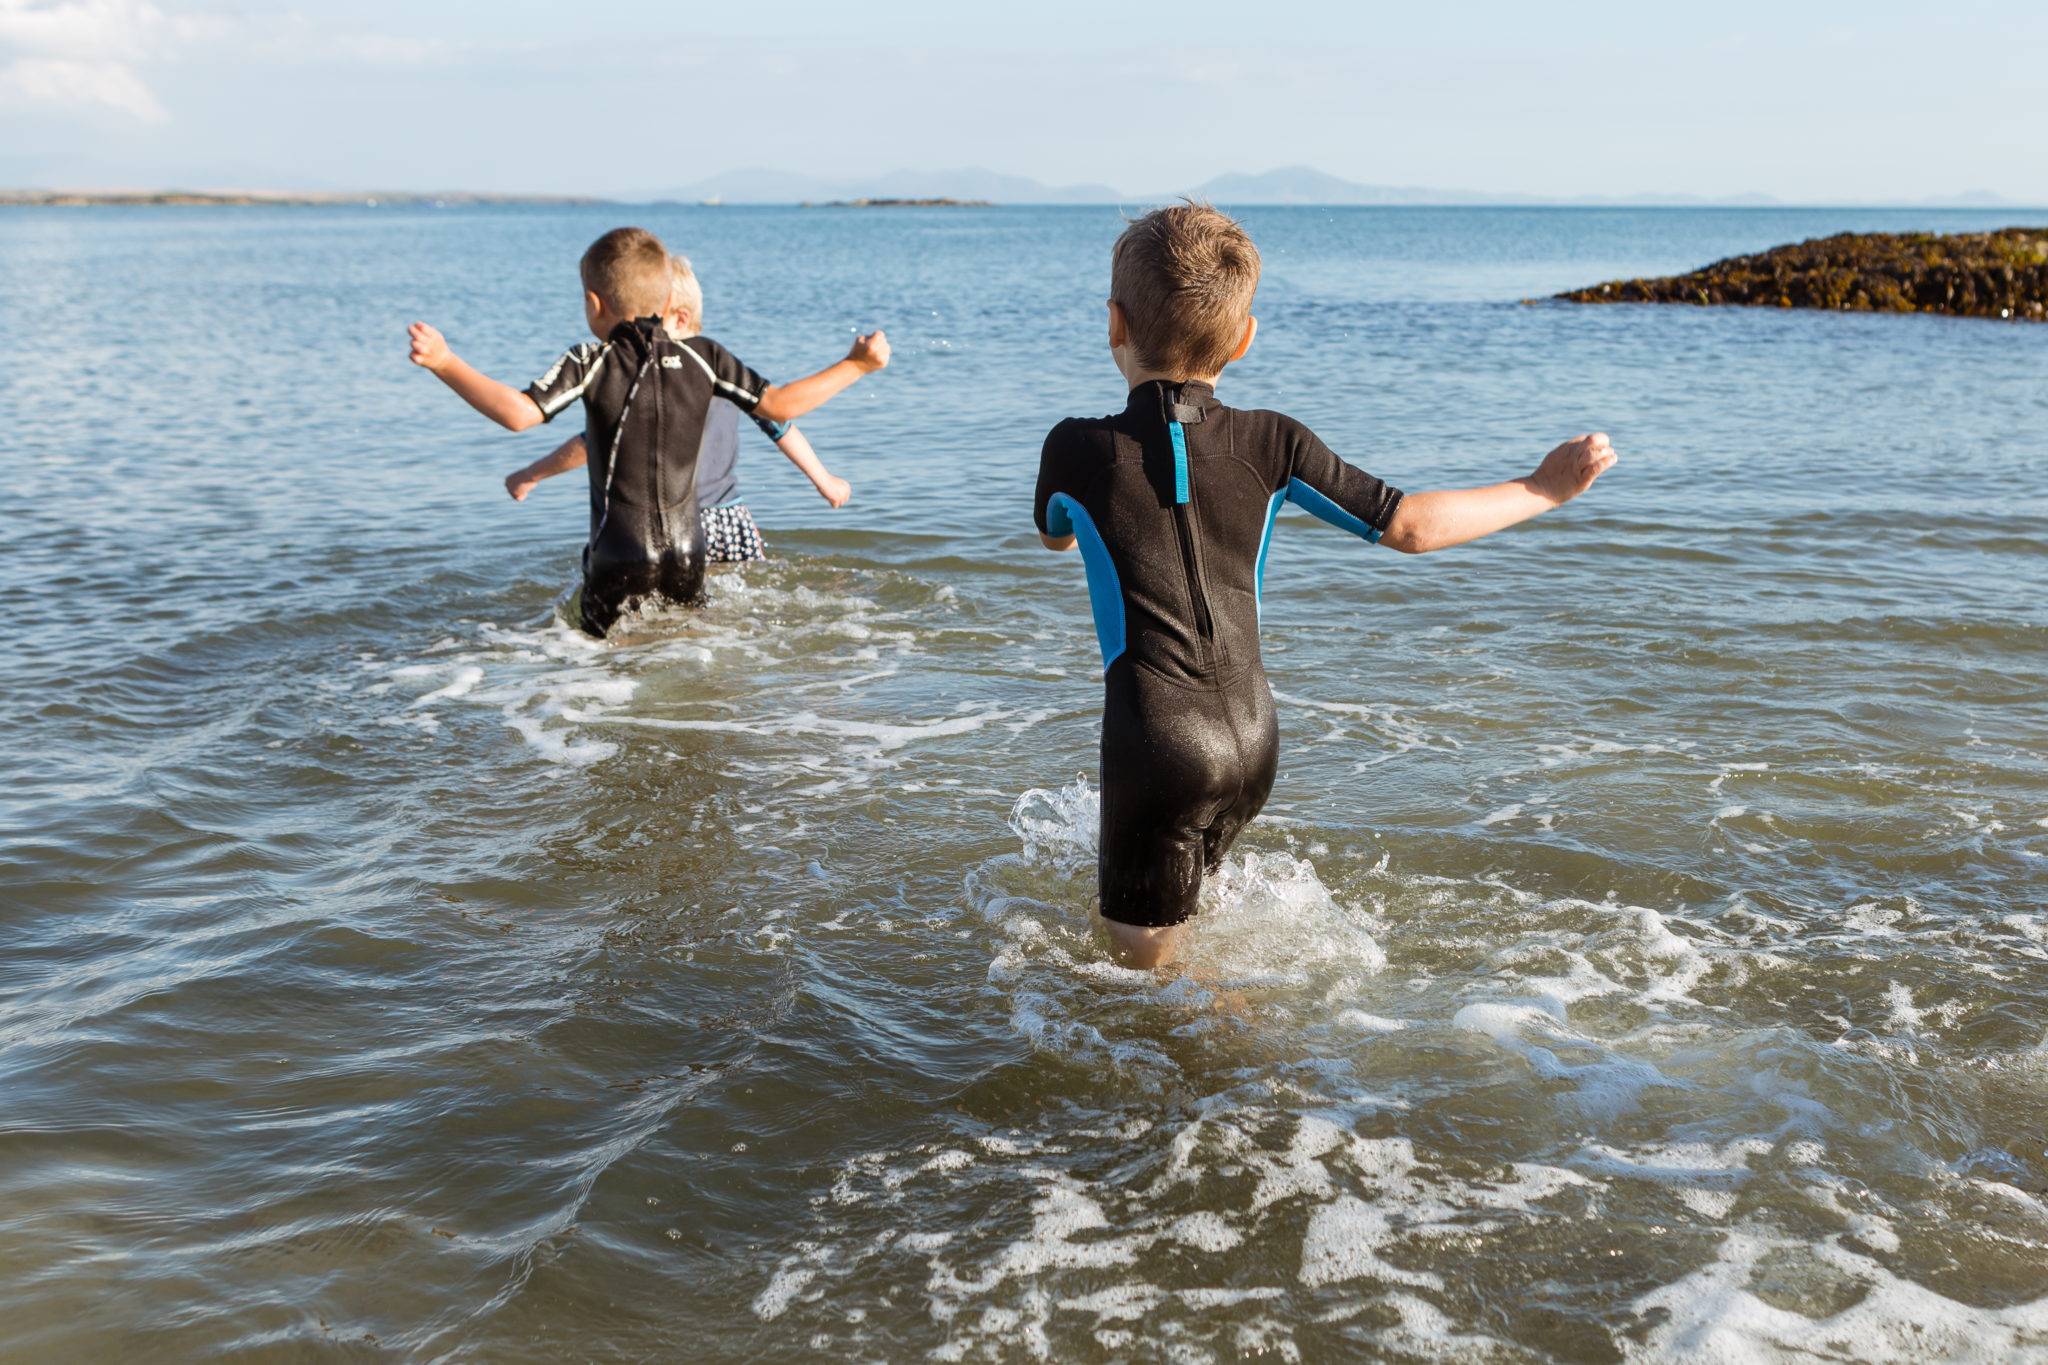 https://bulmerleisure.co.uk/wp-content/uploads/2015/09/silver-bay-holiday-village-anglesey-playing-ocean-children.jpg